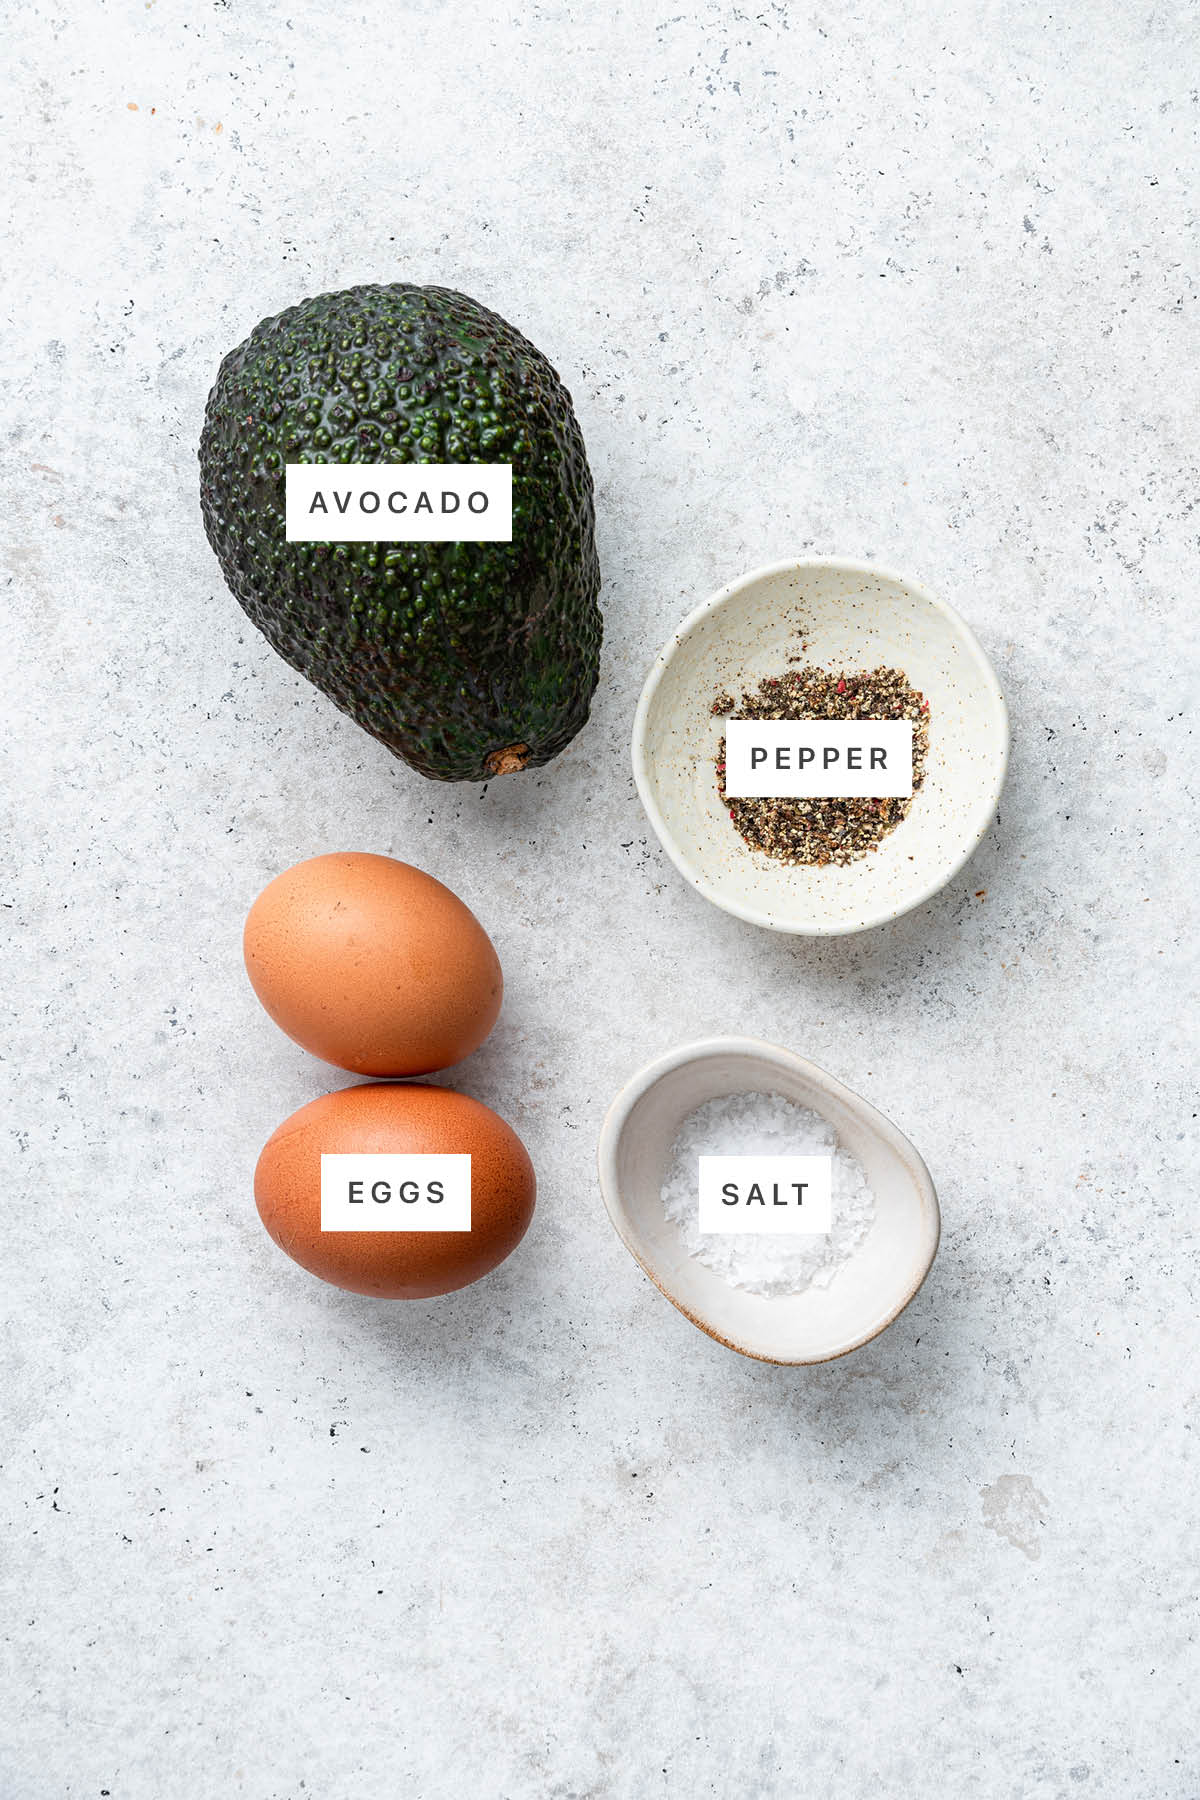 Ingredients measured out to make Baked Avocado Eggs: avocado, pepper, eggs and salt.